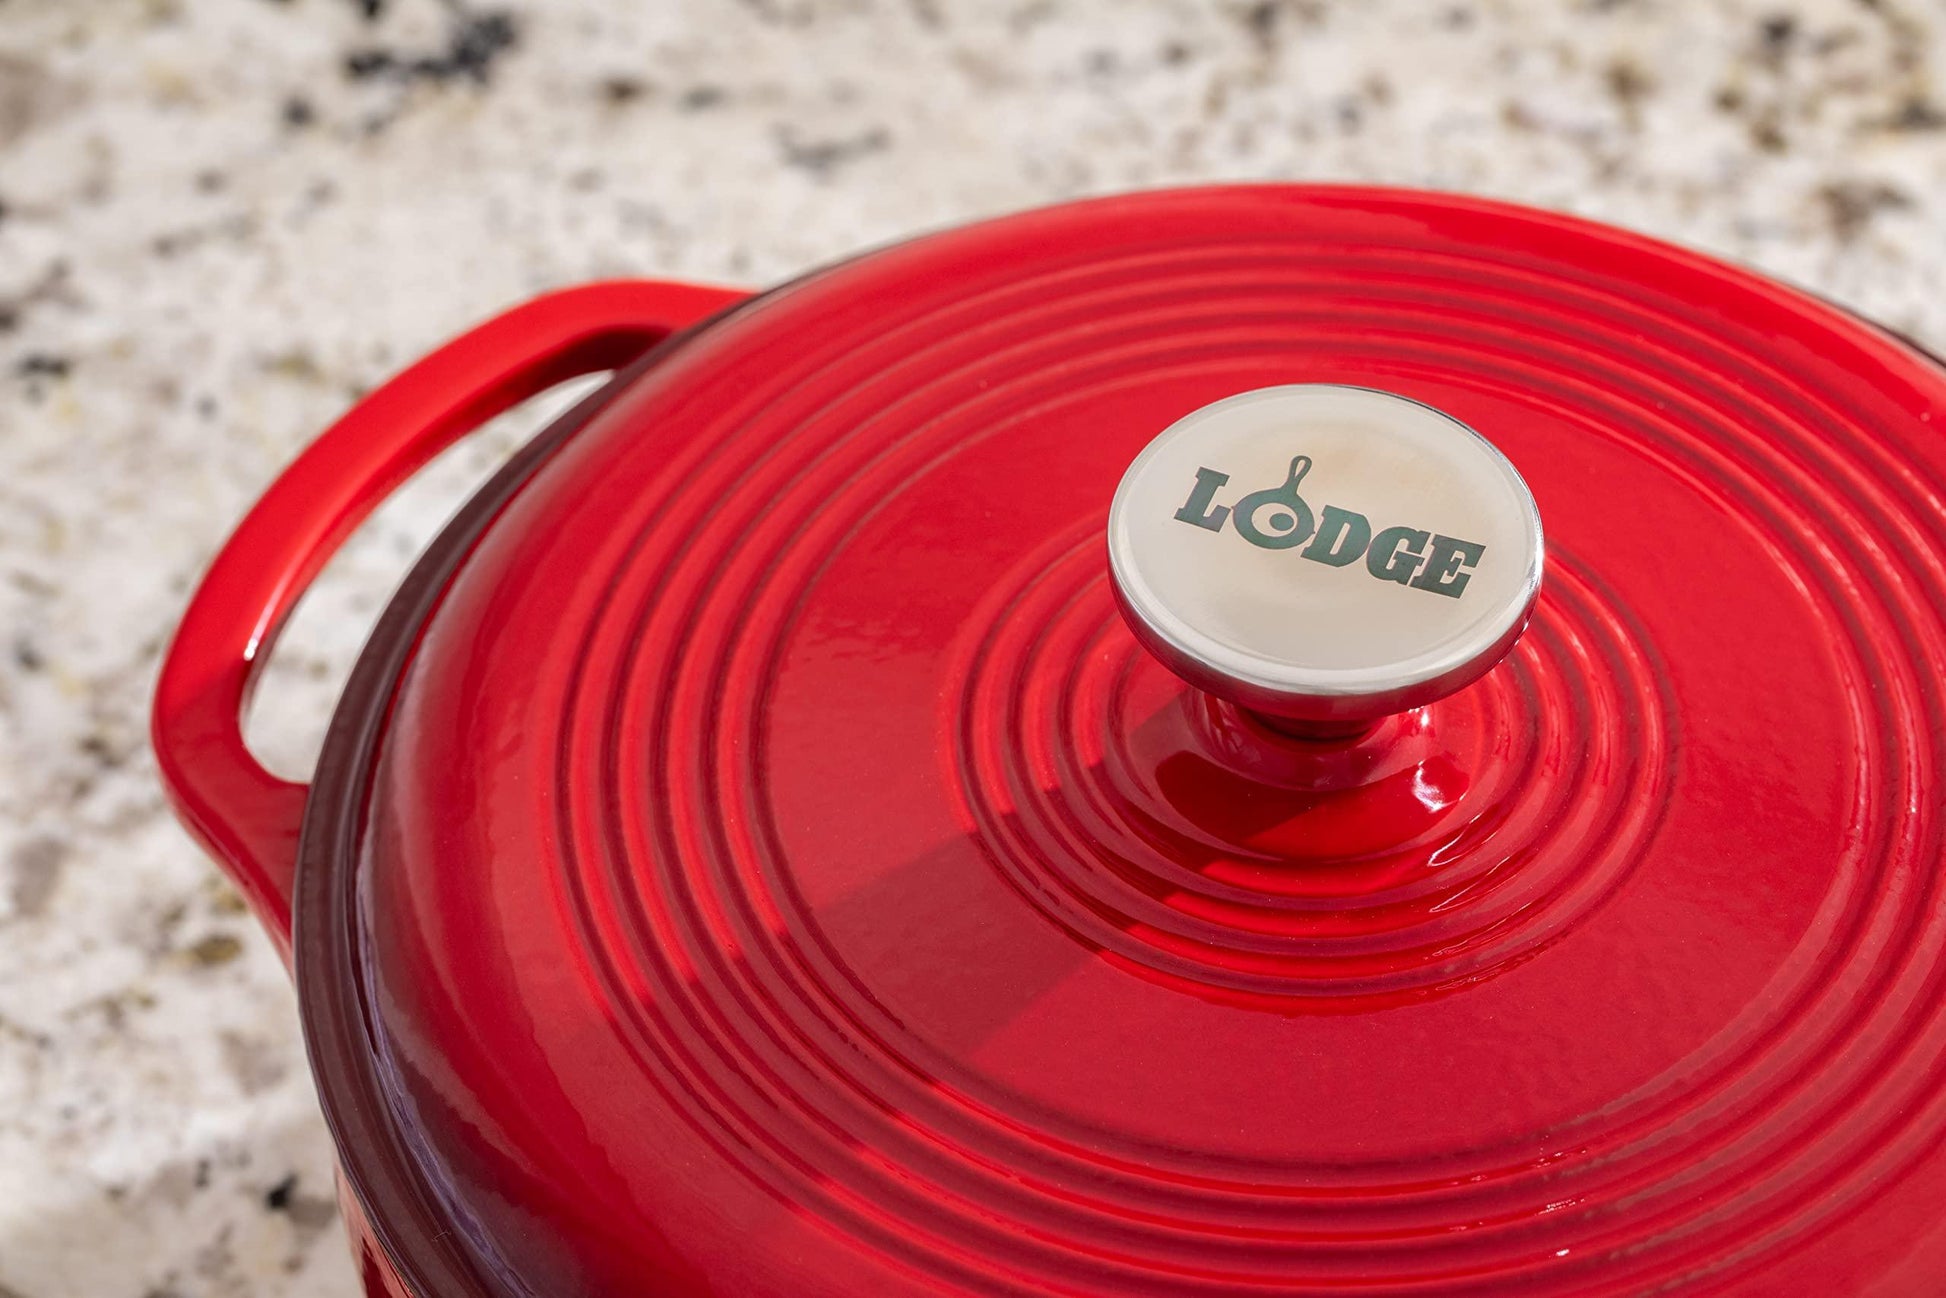 Lodge 4.5 Quart Enameled Cast Iron Dutch Oven with Lid – Dual Handles – Oven Safe up to 500° F or on Stovetop - Use to Marinate, Cook, Bake, Refrigerate and Serve – Island Spice Red - CookCave